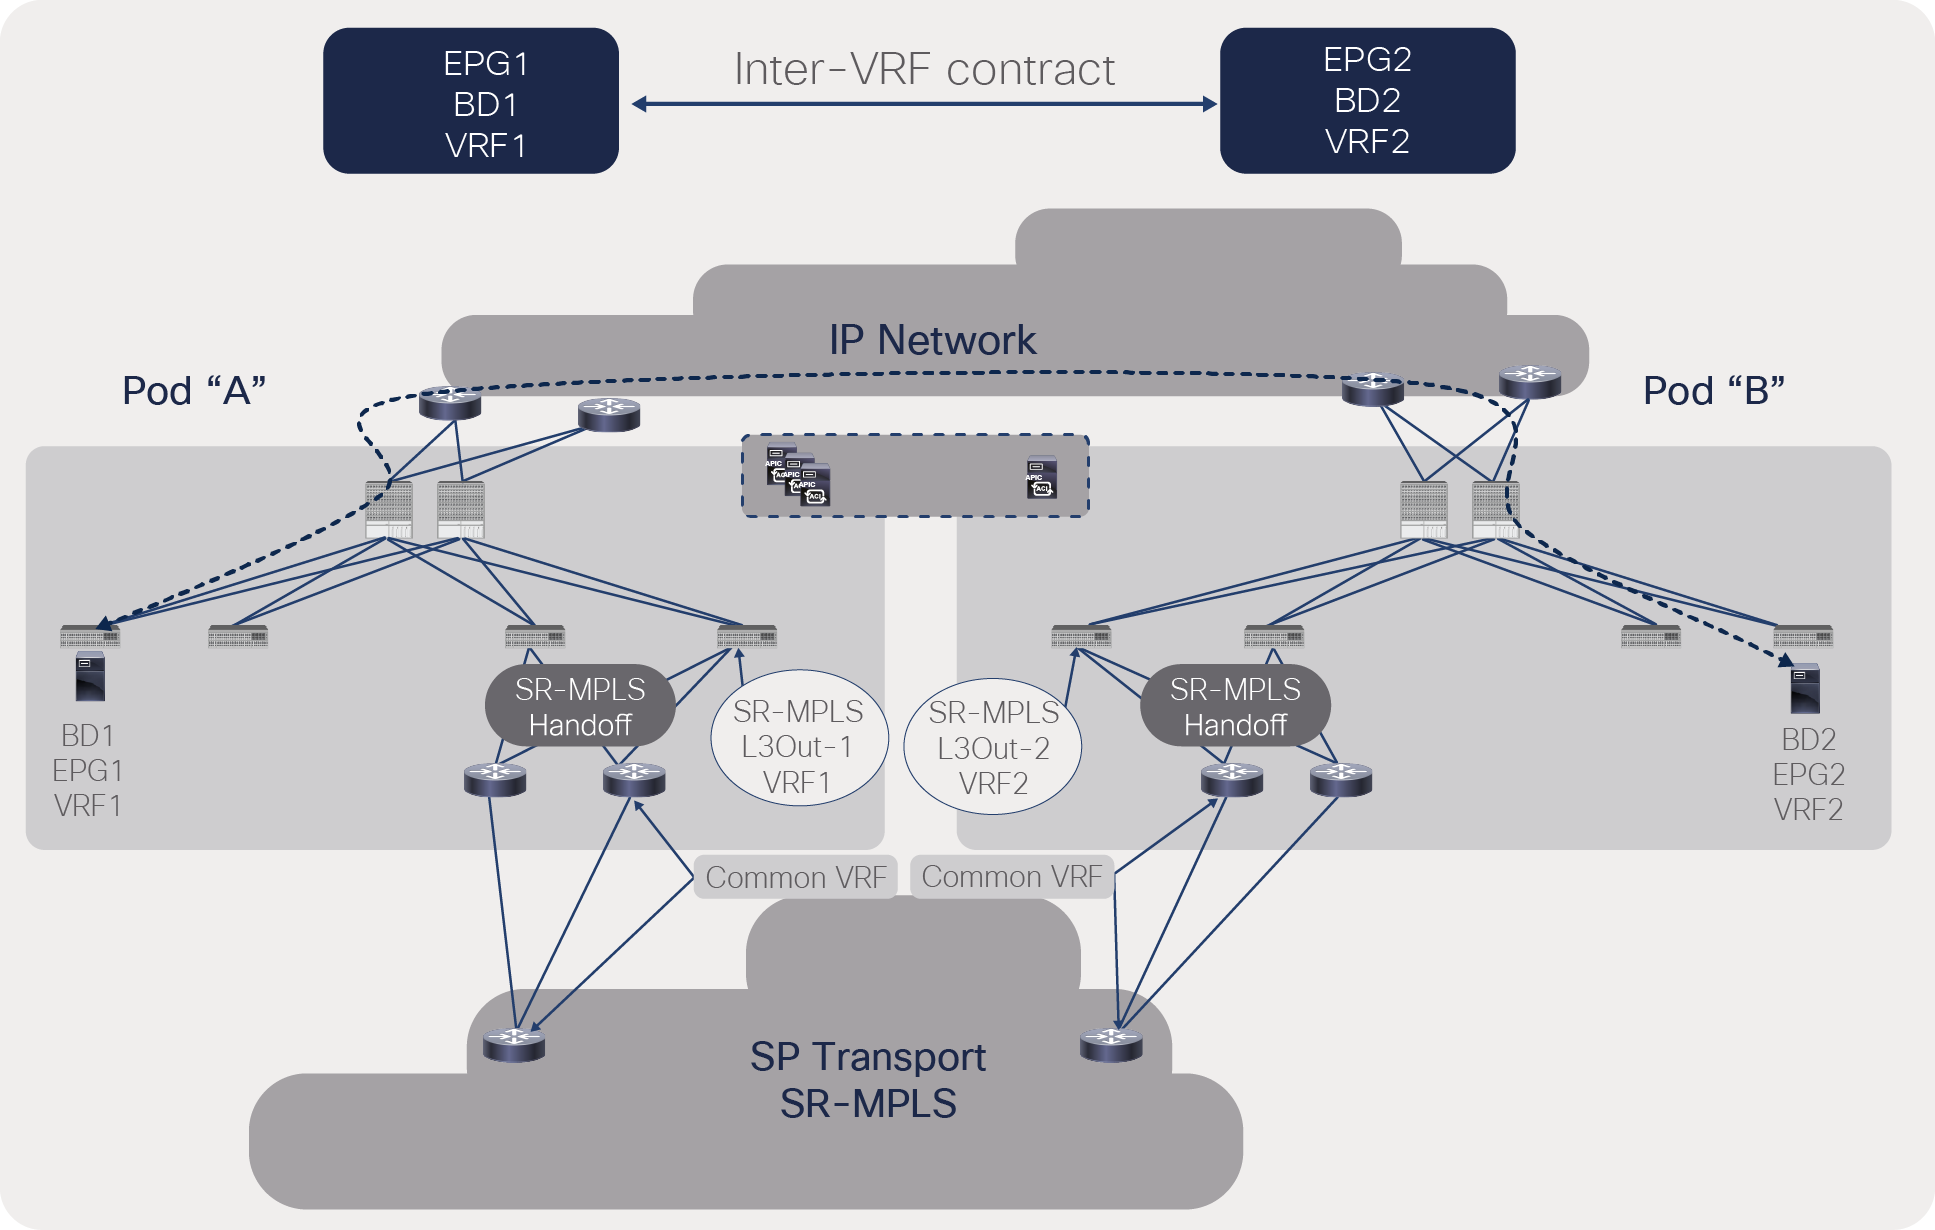 Traffic forwarding between ACI pods with an inter-VRF contract between pods